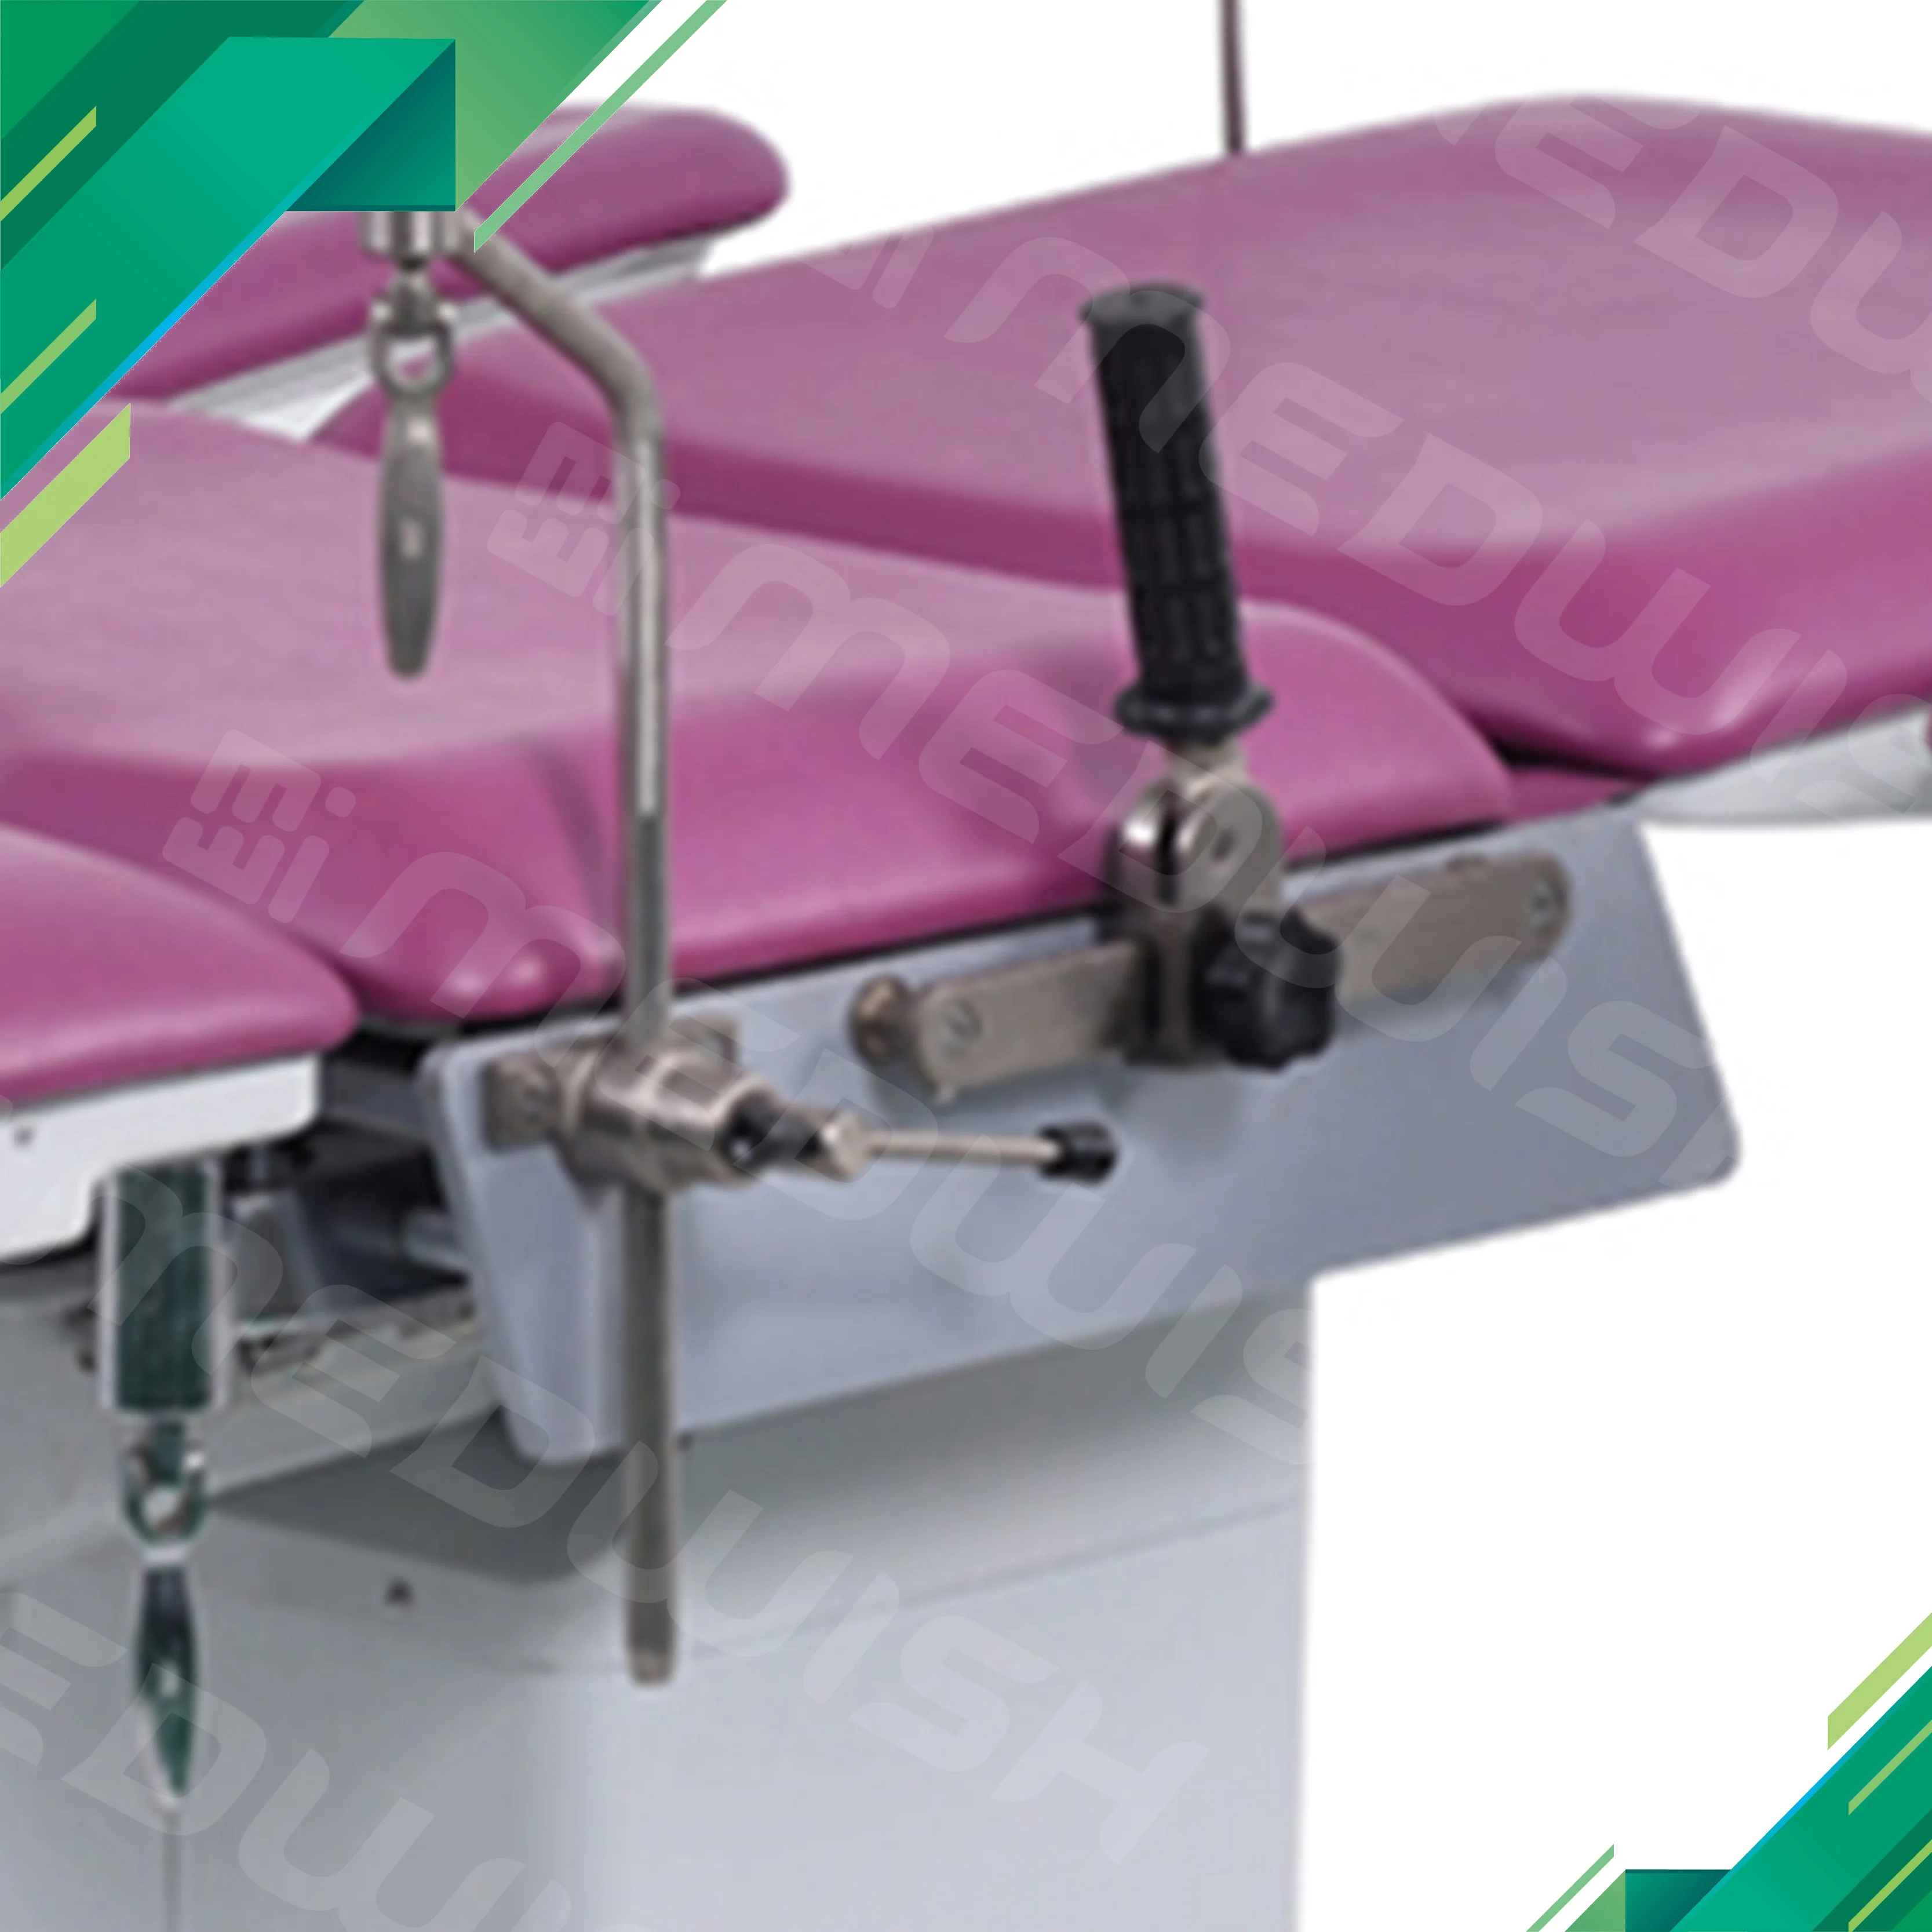 OEM Medical hospital surgical gynecology labor and delivery examination table medical multi function electric obstetric table